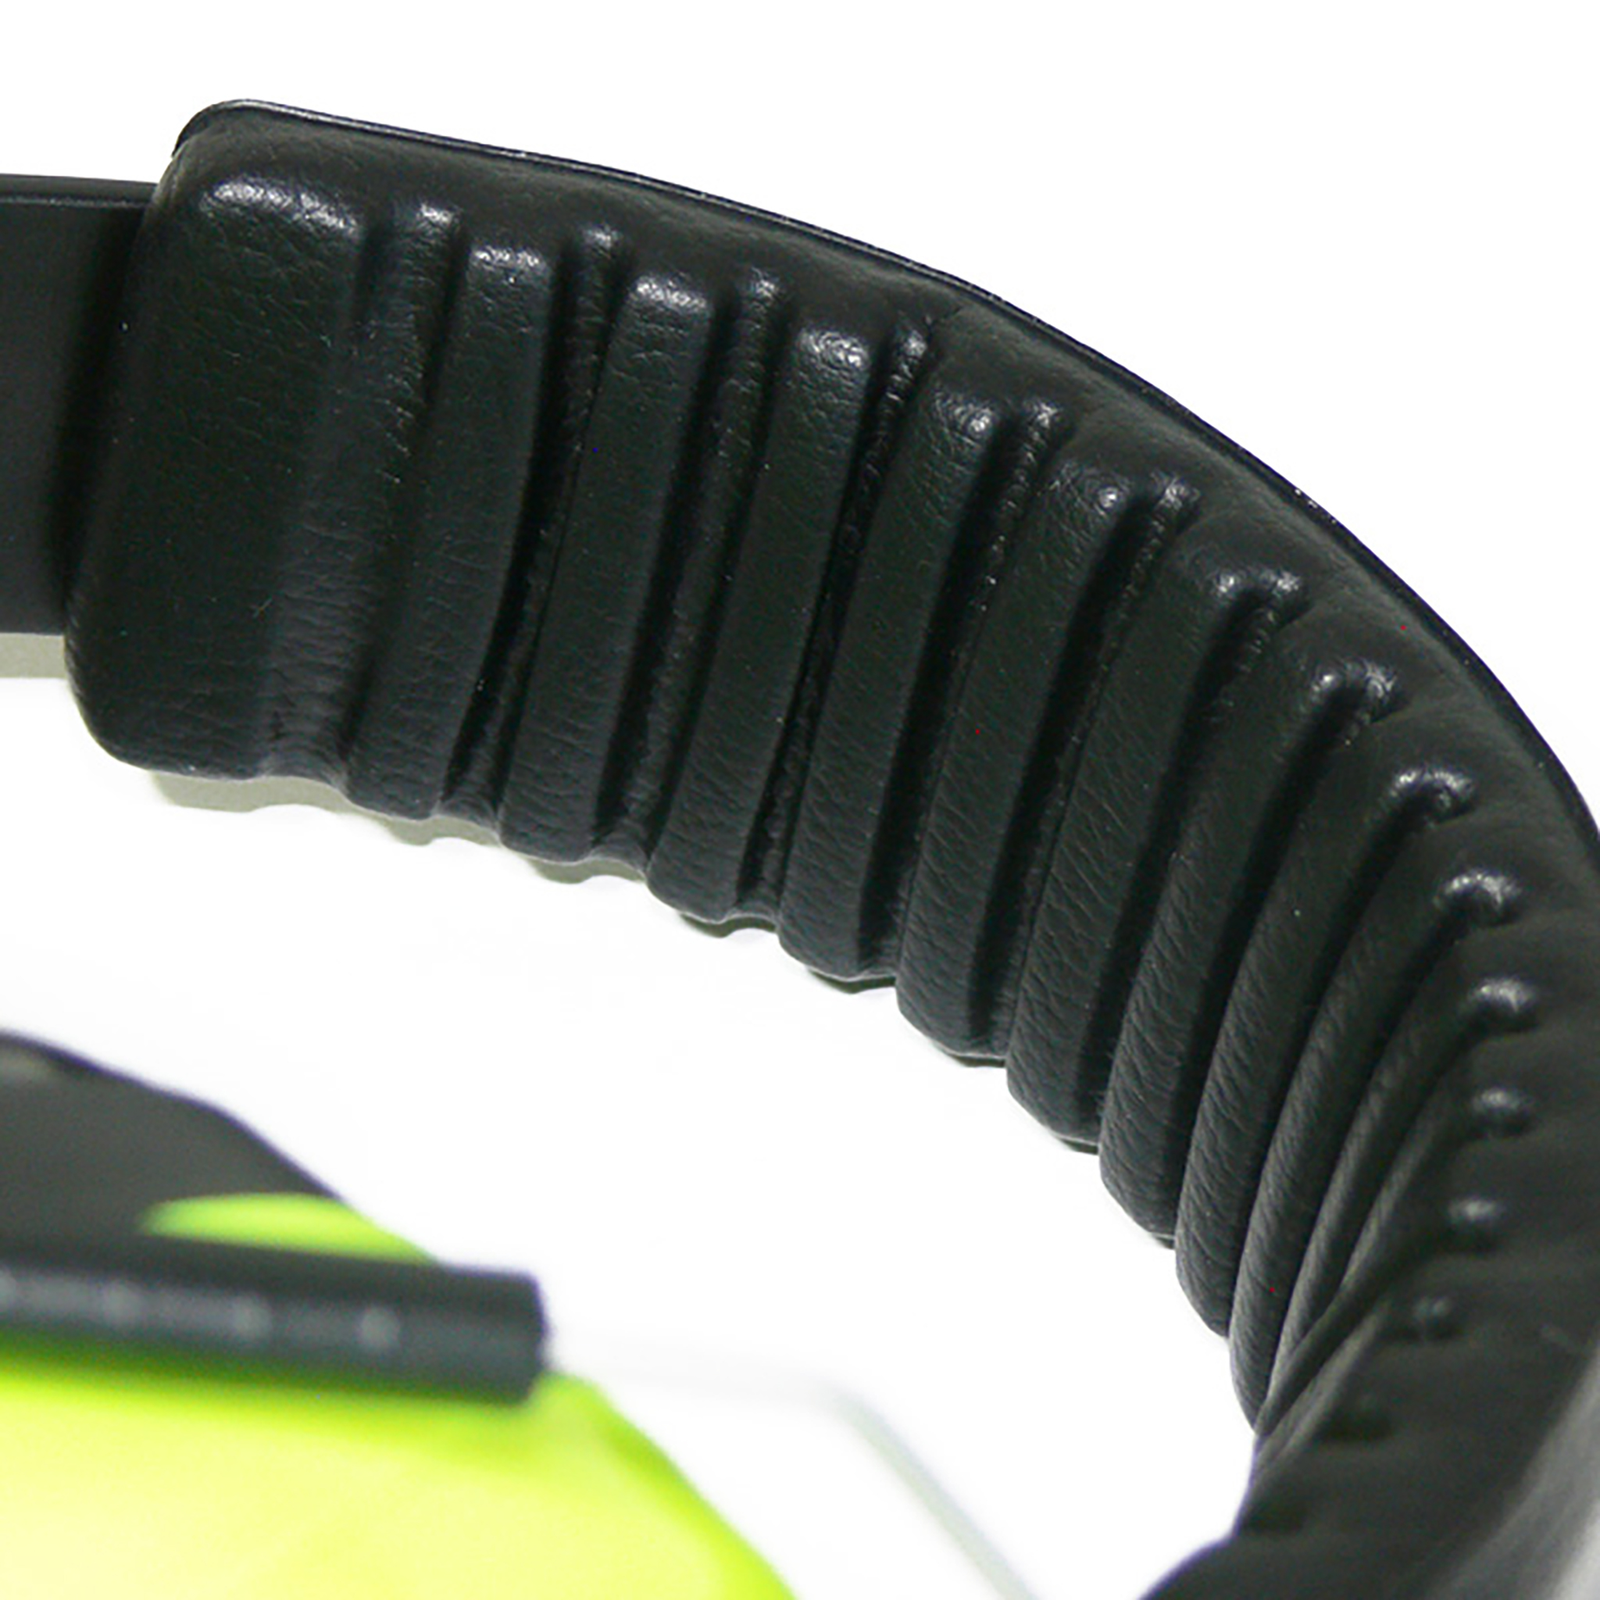 close up of the soft padded black hear band of the JORESTECH ANSI compliant Ear muff